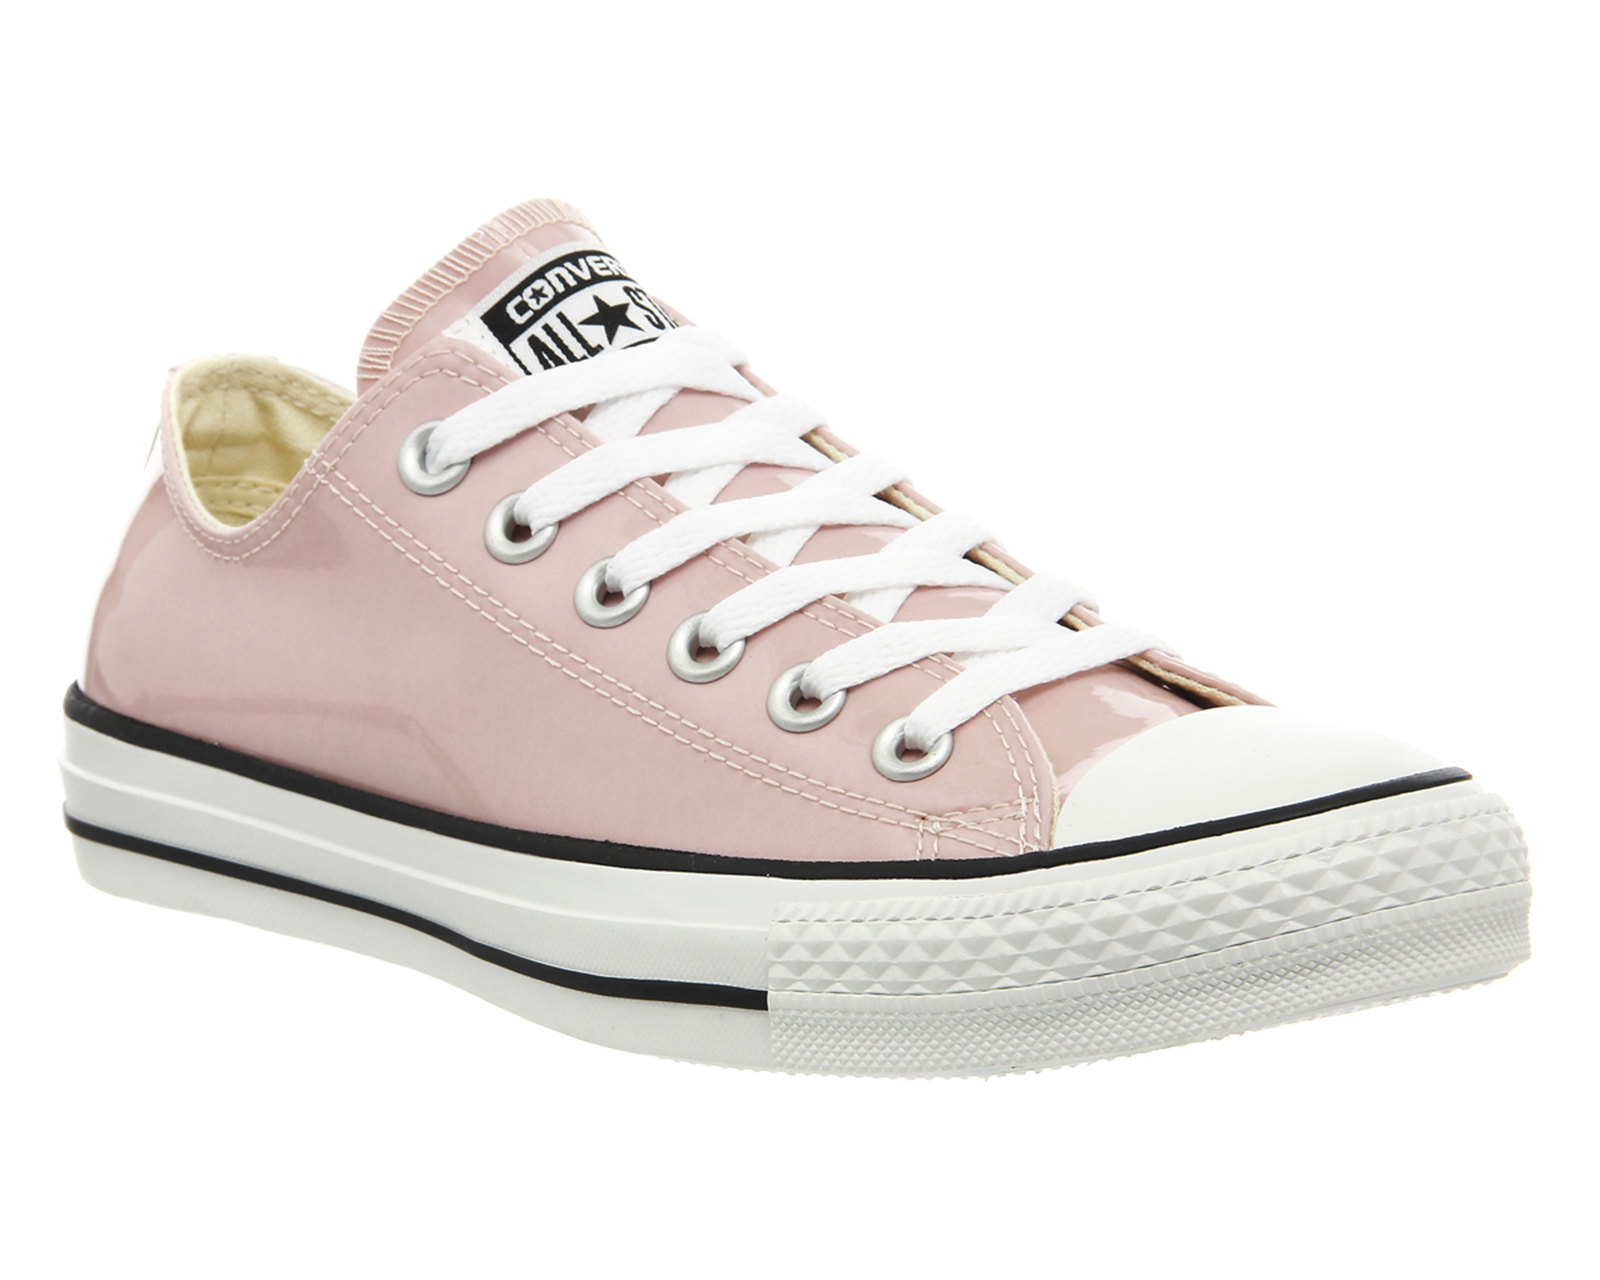 ConverseAll Star LowRose Pastel Patent Exclusive